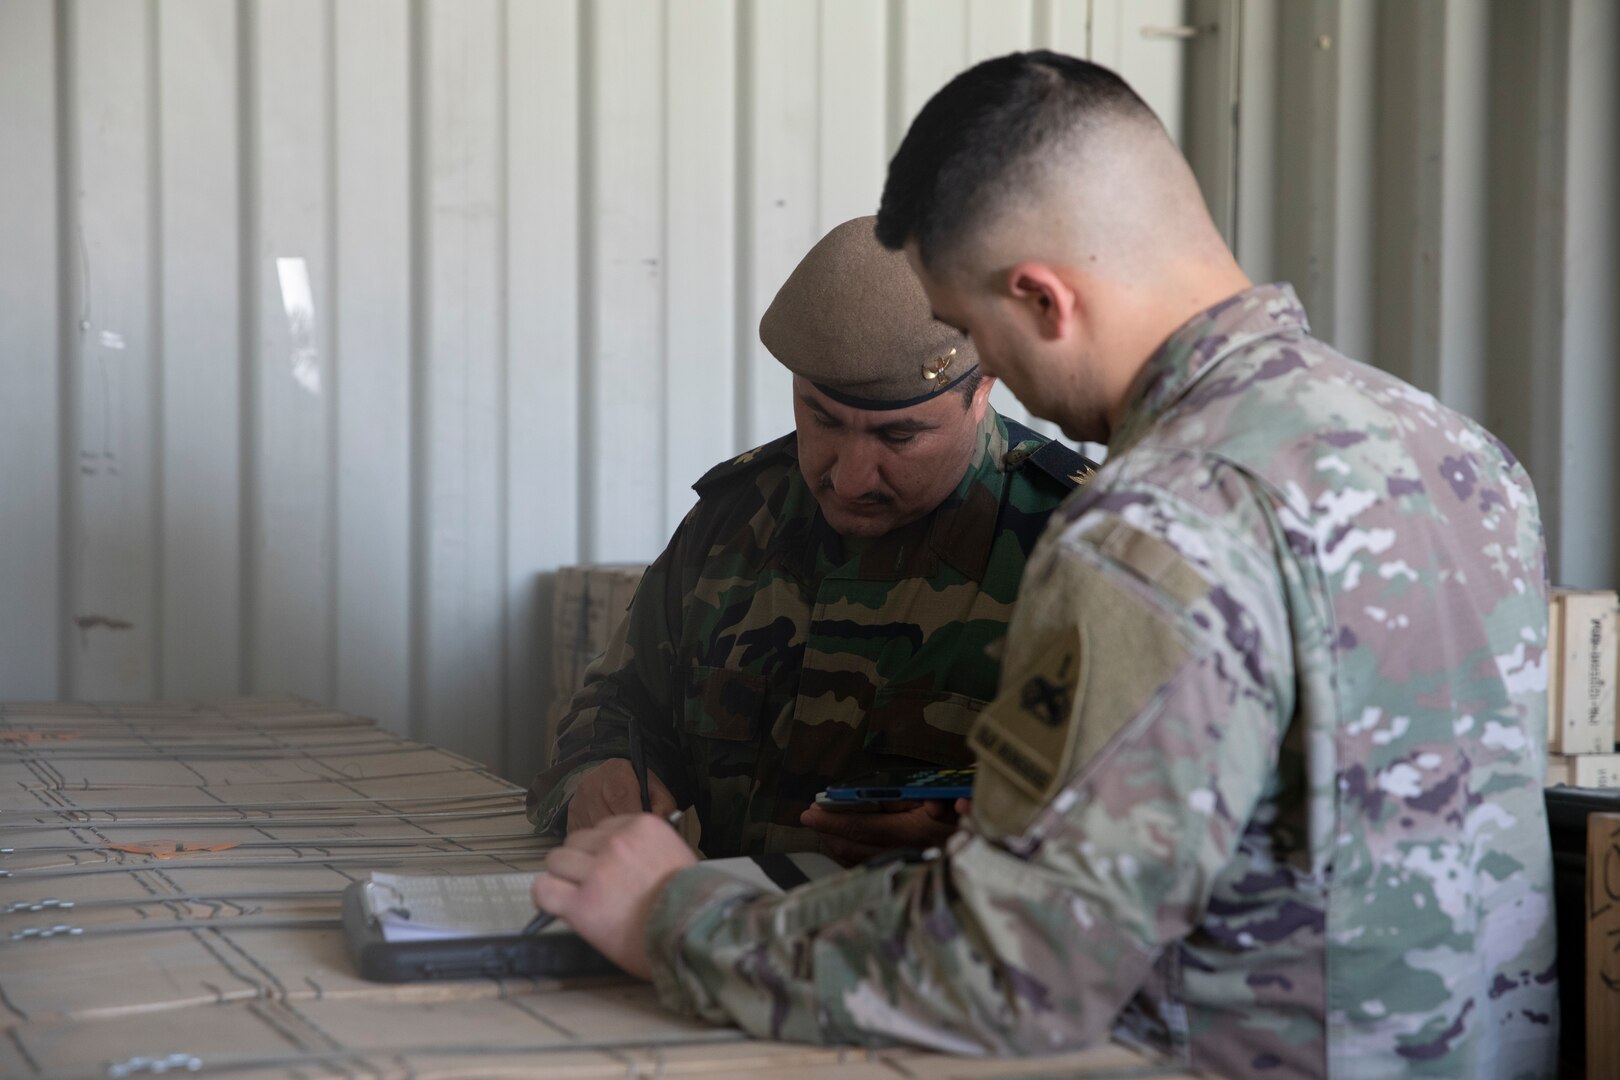 Maj. Arkan Awla Perot, M4 warehouse liaison, and U.S. Army 1st Lt. Raphael Valles, reporting officer with the Counter-ISIS Train and Equip Fund (CTEF) program, verifies the amount of ammunition being divested at Erbil Air Base, Iraq, March 8, 2022. The Combined Joint Task Force - Operation Inherent Resolve’s CTEF program has divested more than $500 million of equipment, vehicles, weapons and ammunition in an effort to advise, assist, and enable partner forces in the enduring defeat of Daesh. (U.S. Army photo by Cpl. Tommy L. Spitzer)